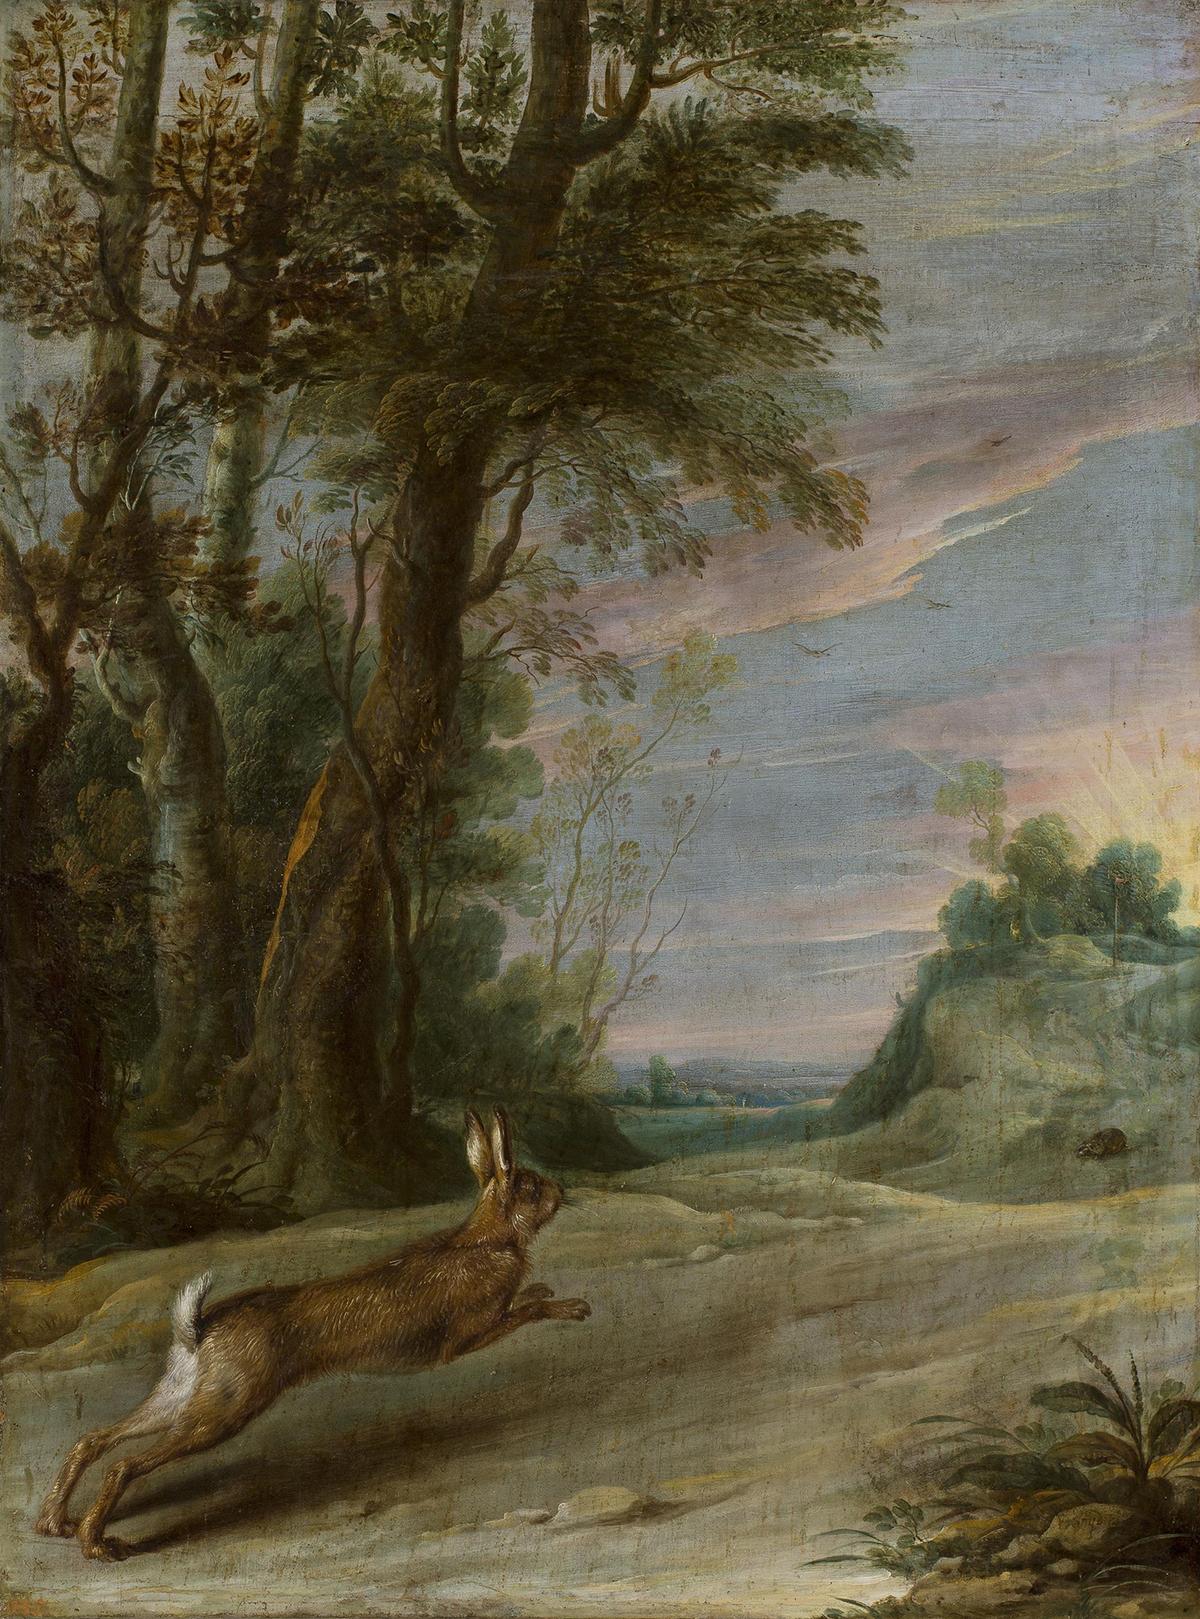 "Fable of the Hare and the Tortoise," 17th century, by Frans Snyders. Oil on canvas. The Prado Museum, Madrid. (Public Domain)